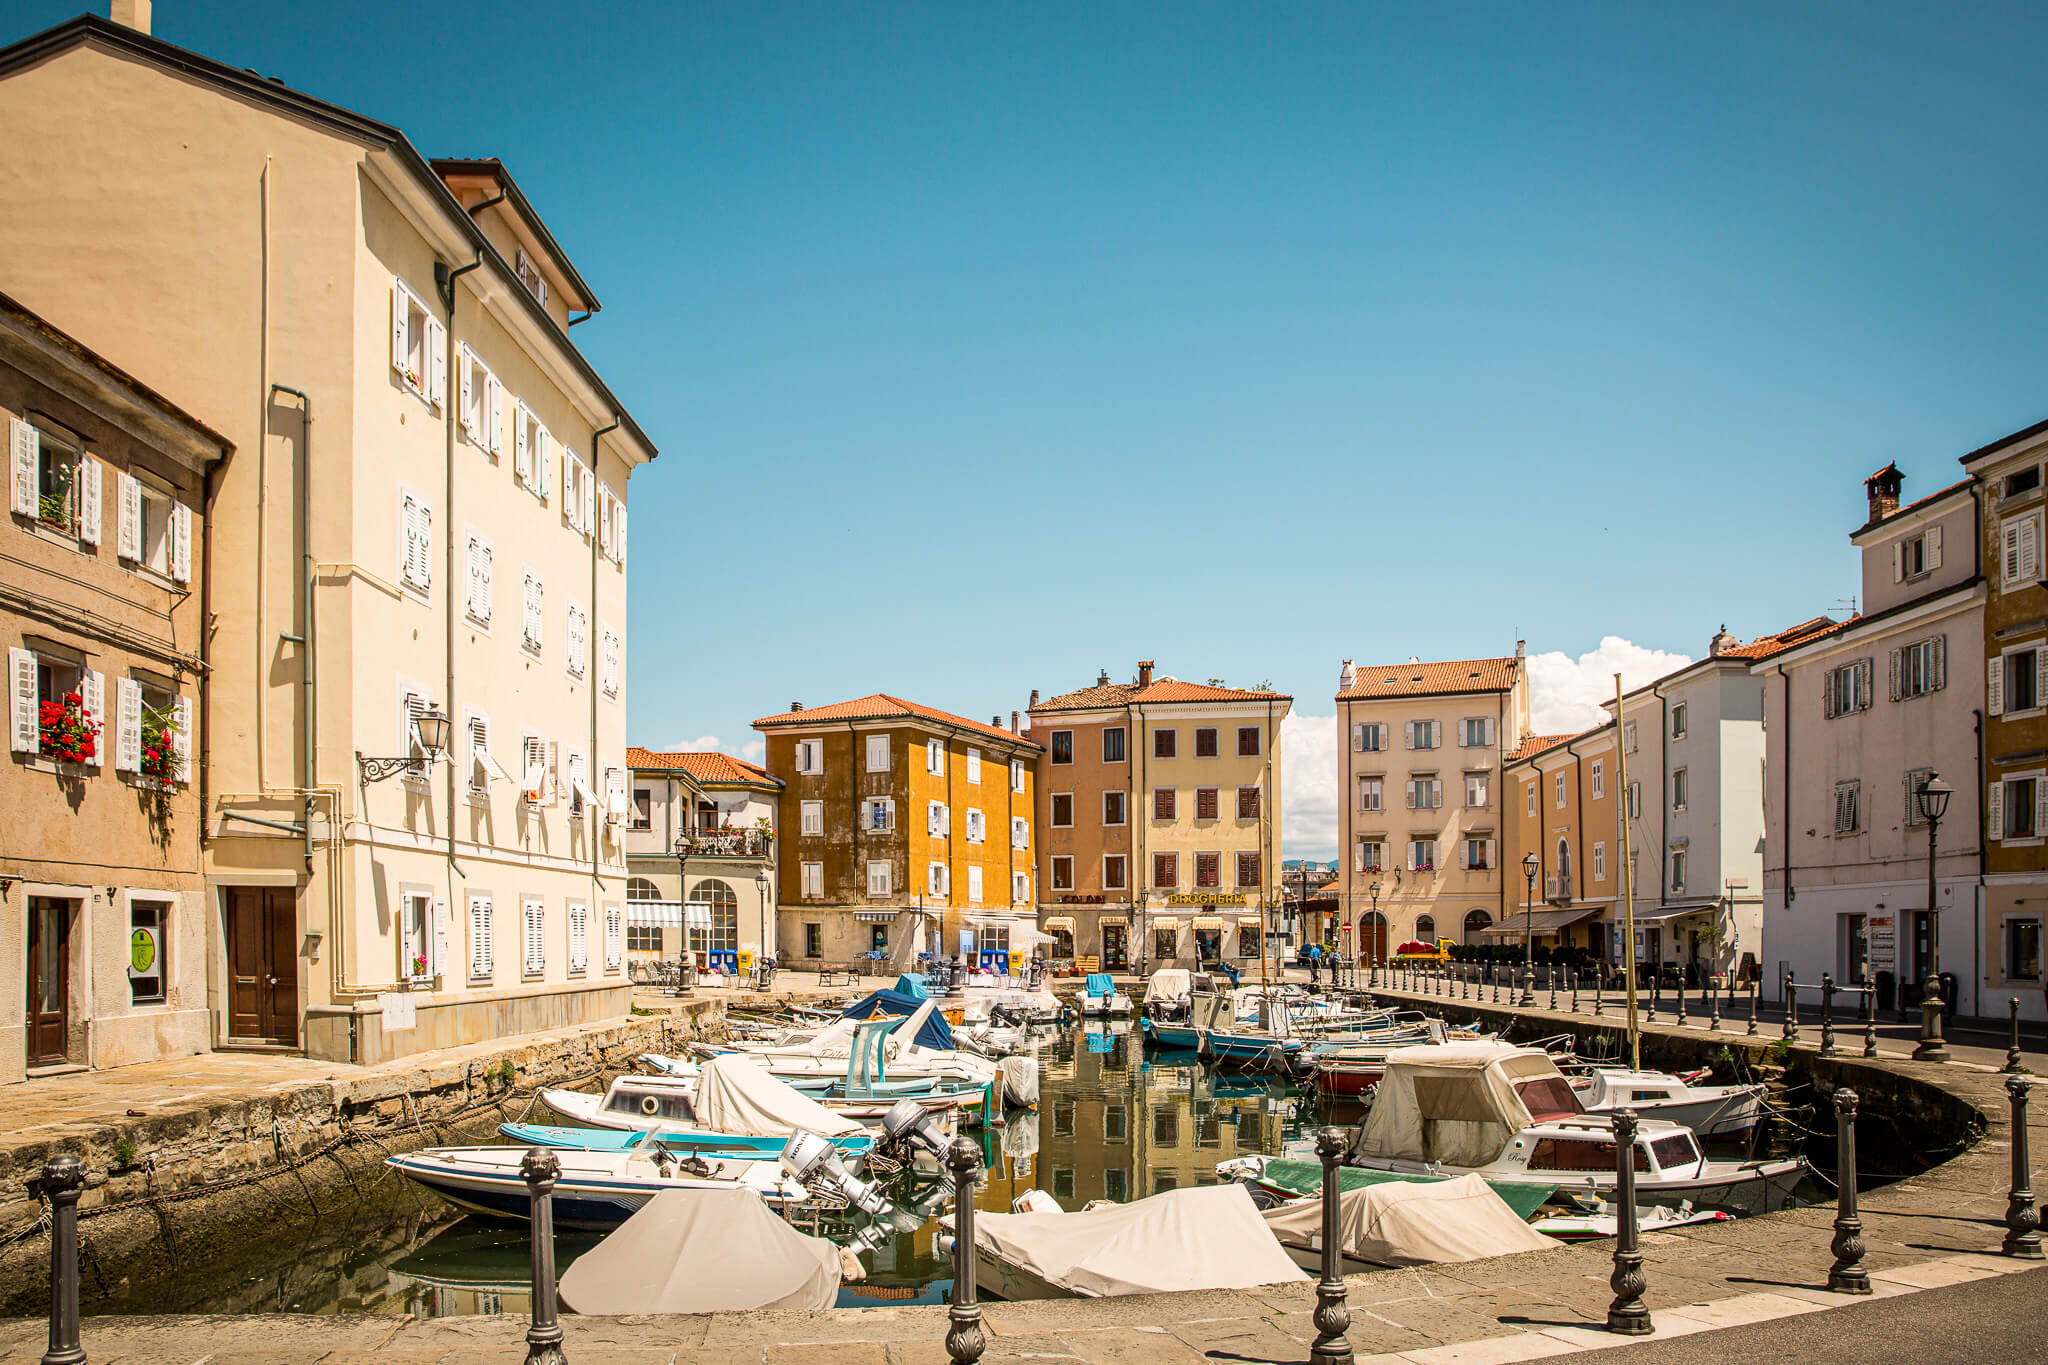 A small protected marina in Muggia, near Trieste, Italy